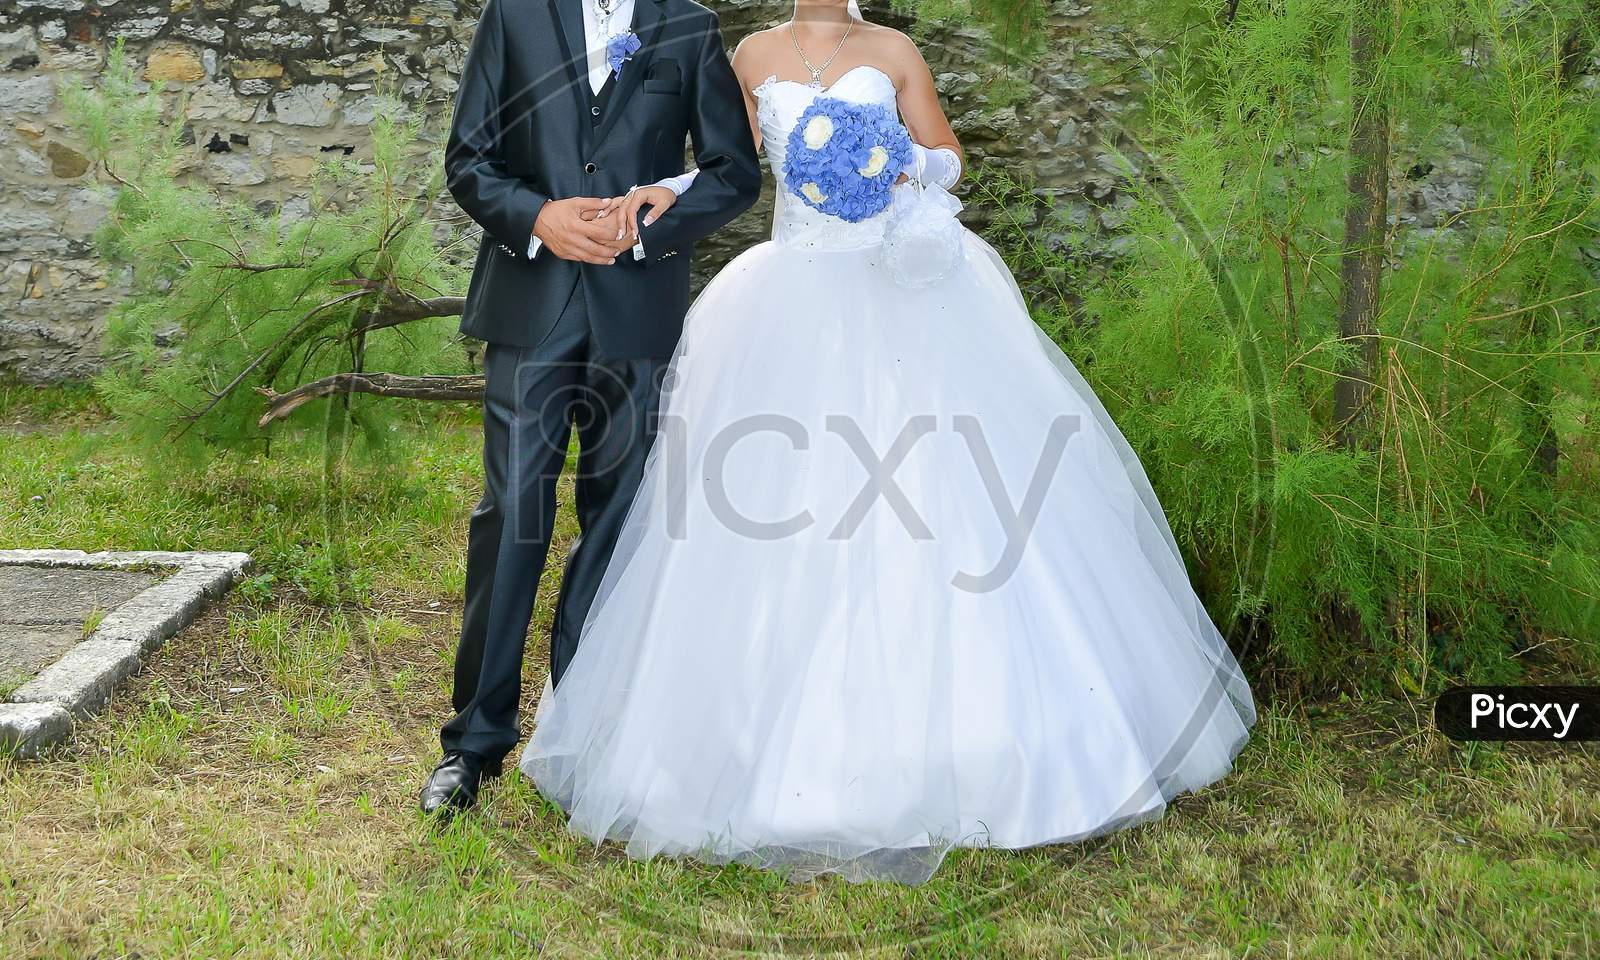 Outdoor Portrait Of Bride And Groom. The Bride Is Holding A Blue Flower Bouquet